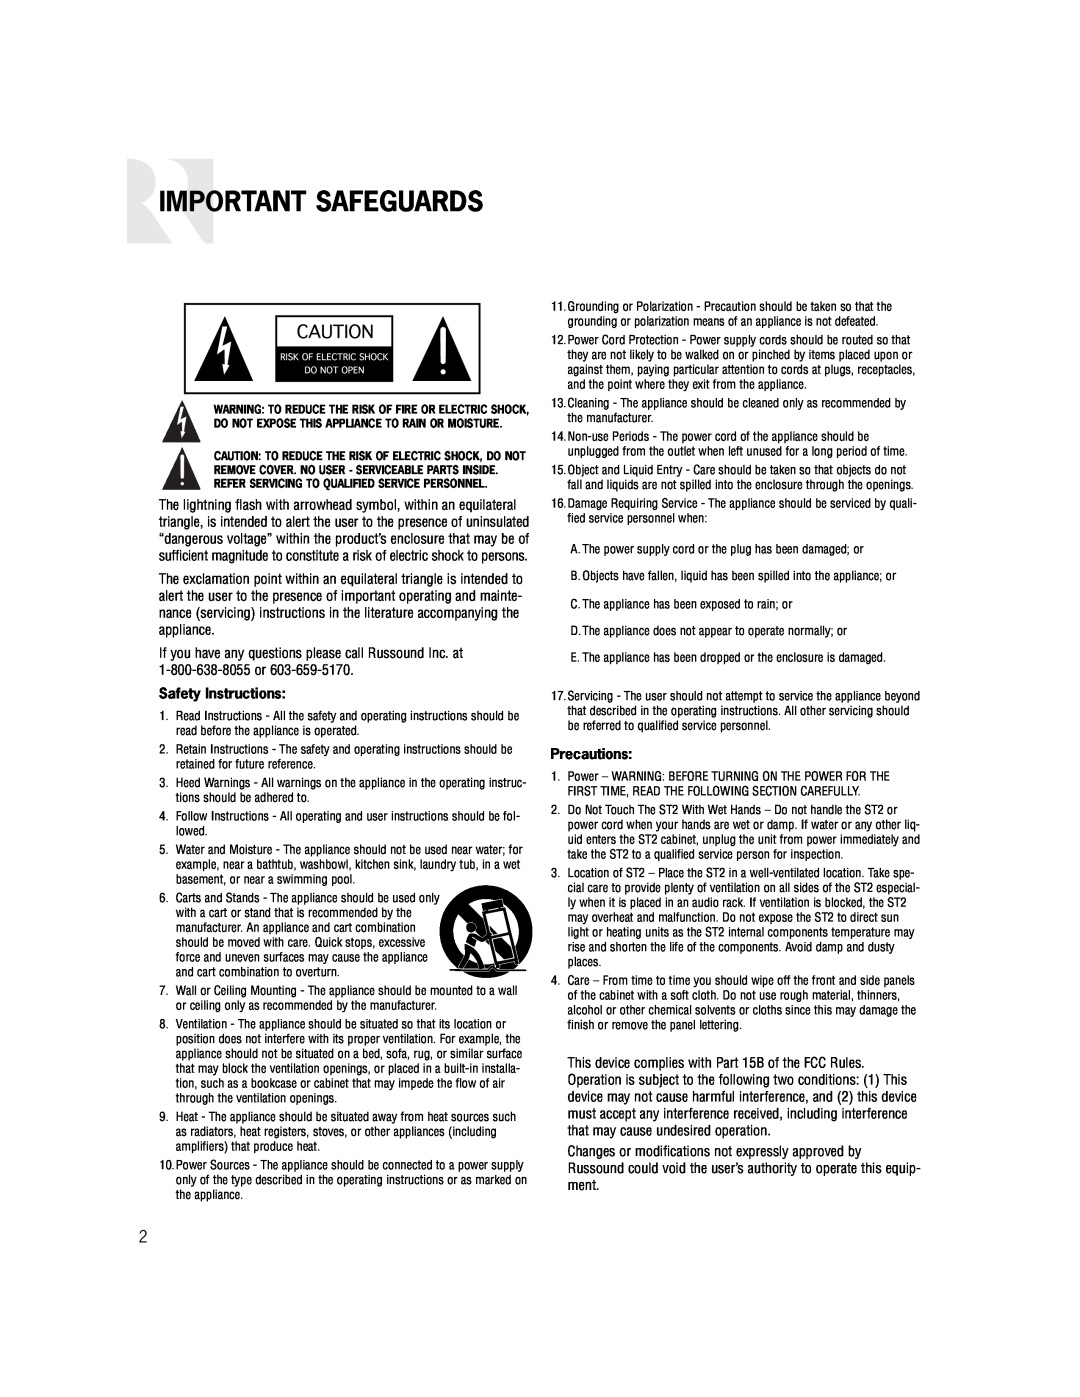 Russound ST2-XM manual Important Safeguards, Safety Instructions, Precautions 